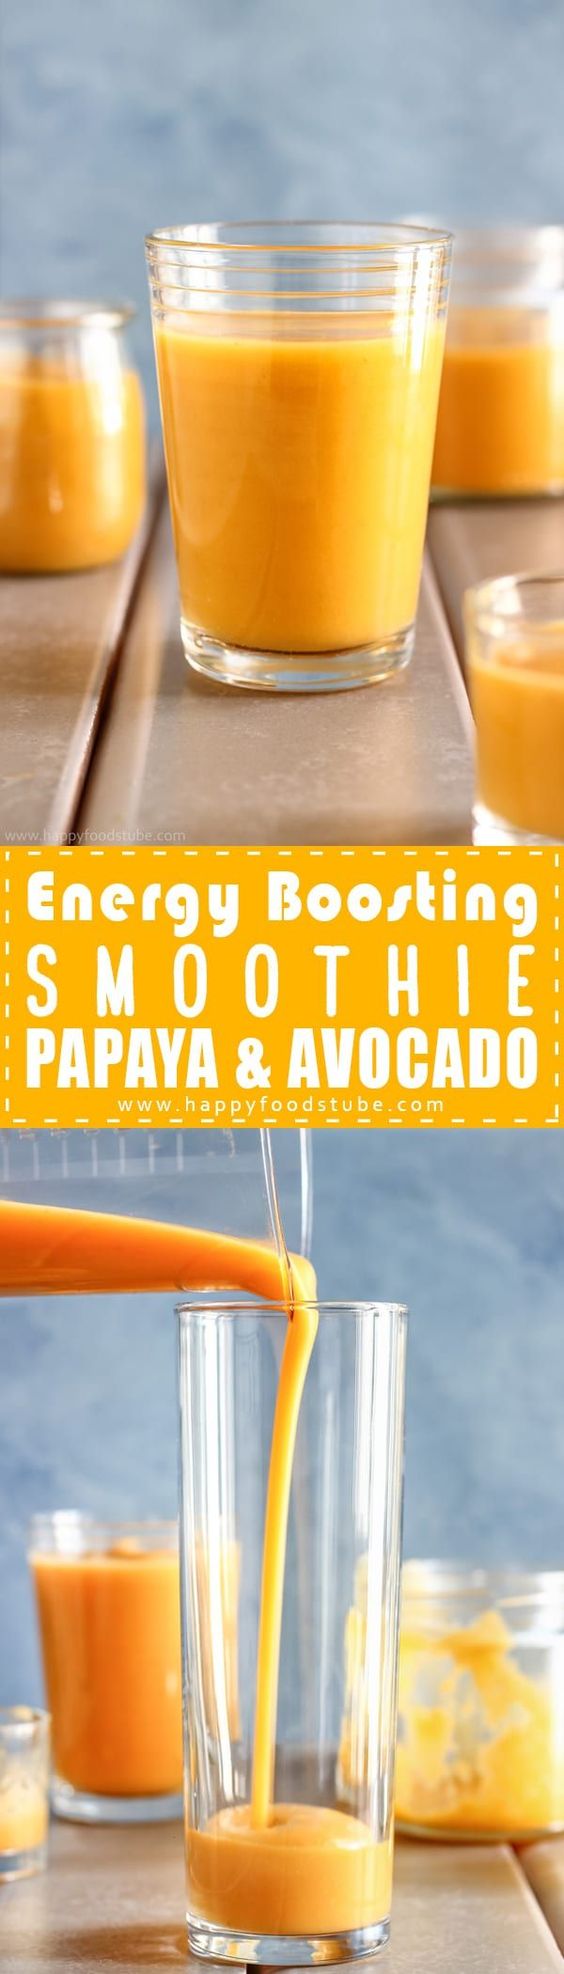 Discover enerygy boosting recipes of healthy smoothies in this great article. Learn how to prepare healthy breakfast smoothies for optimum wellness. #healthy #health #healthyliving #nutrition #wellness #fitnessgoals #keepingfit #nutrition #healthyrecipes